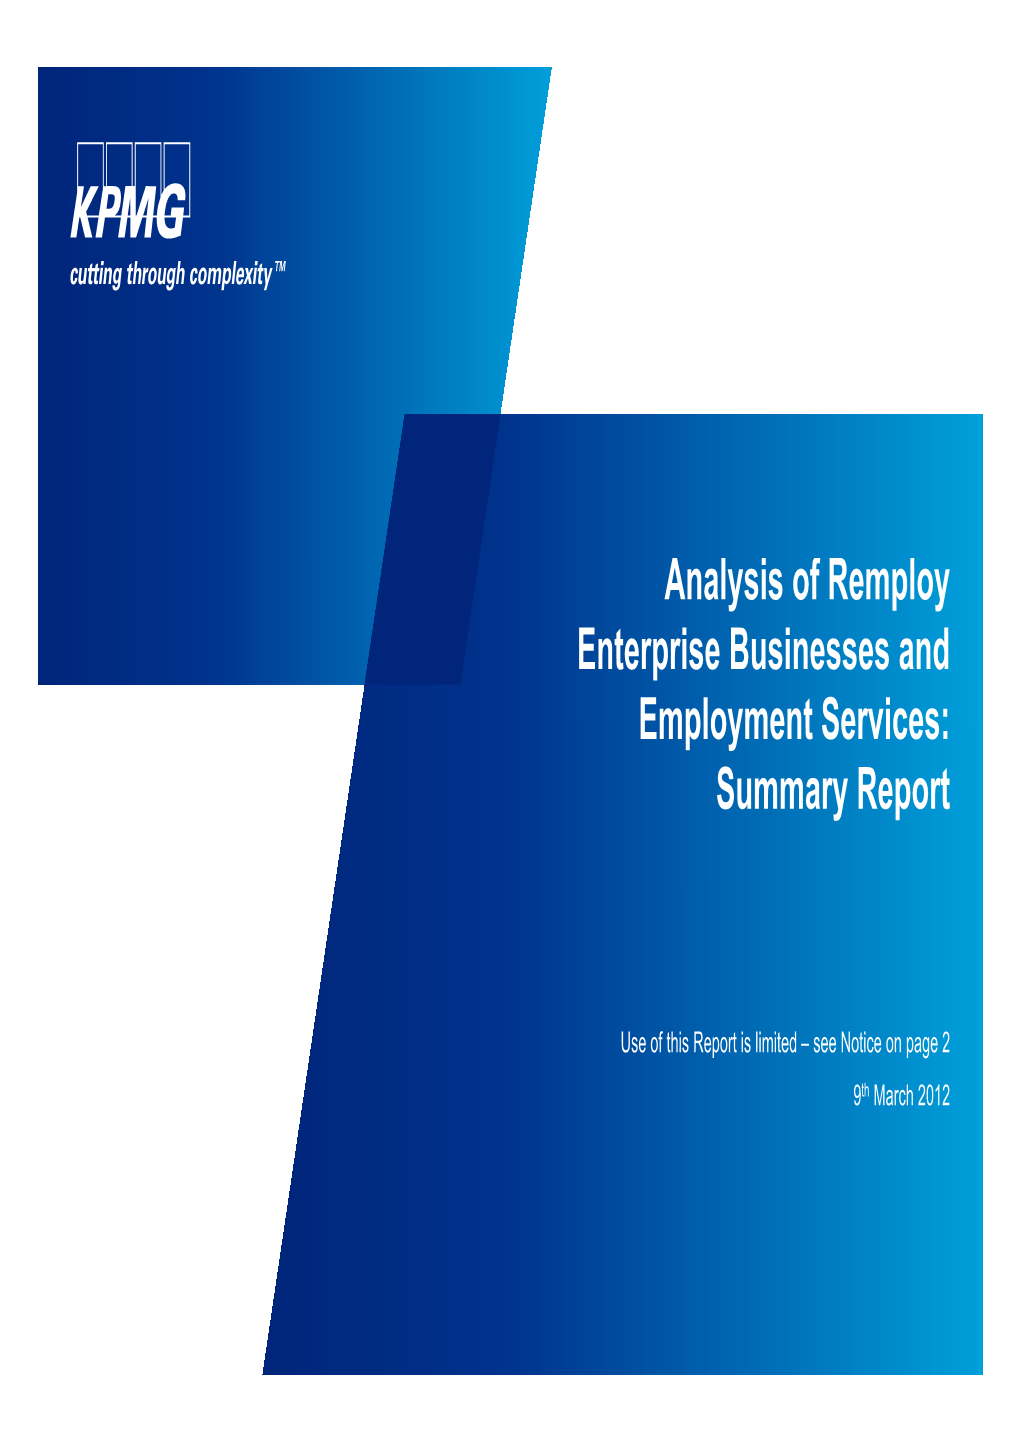 Analysis of Remploy Enterprise Businesses and Employment